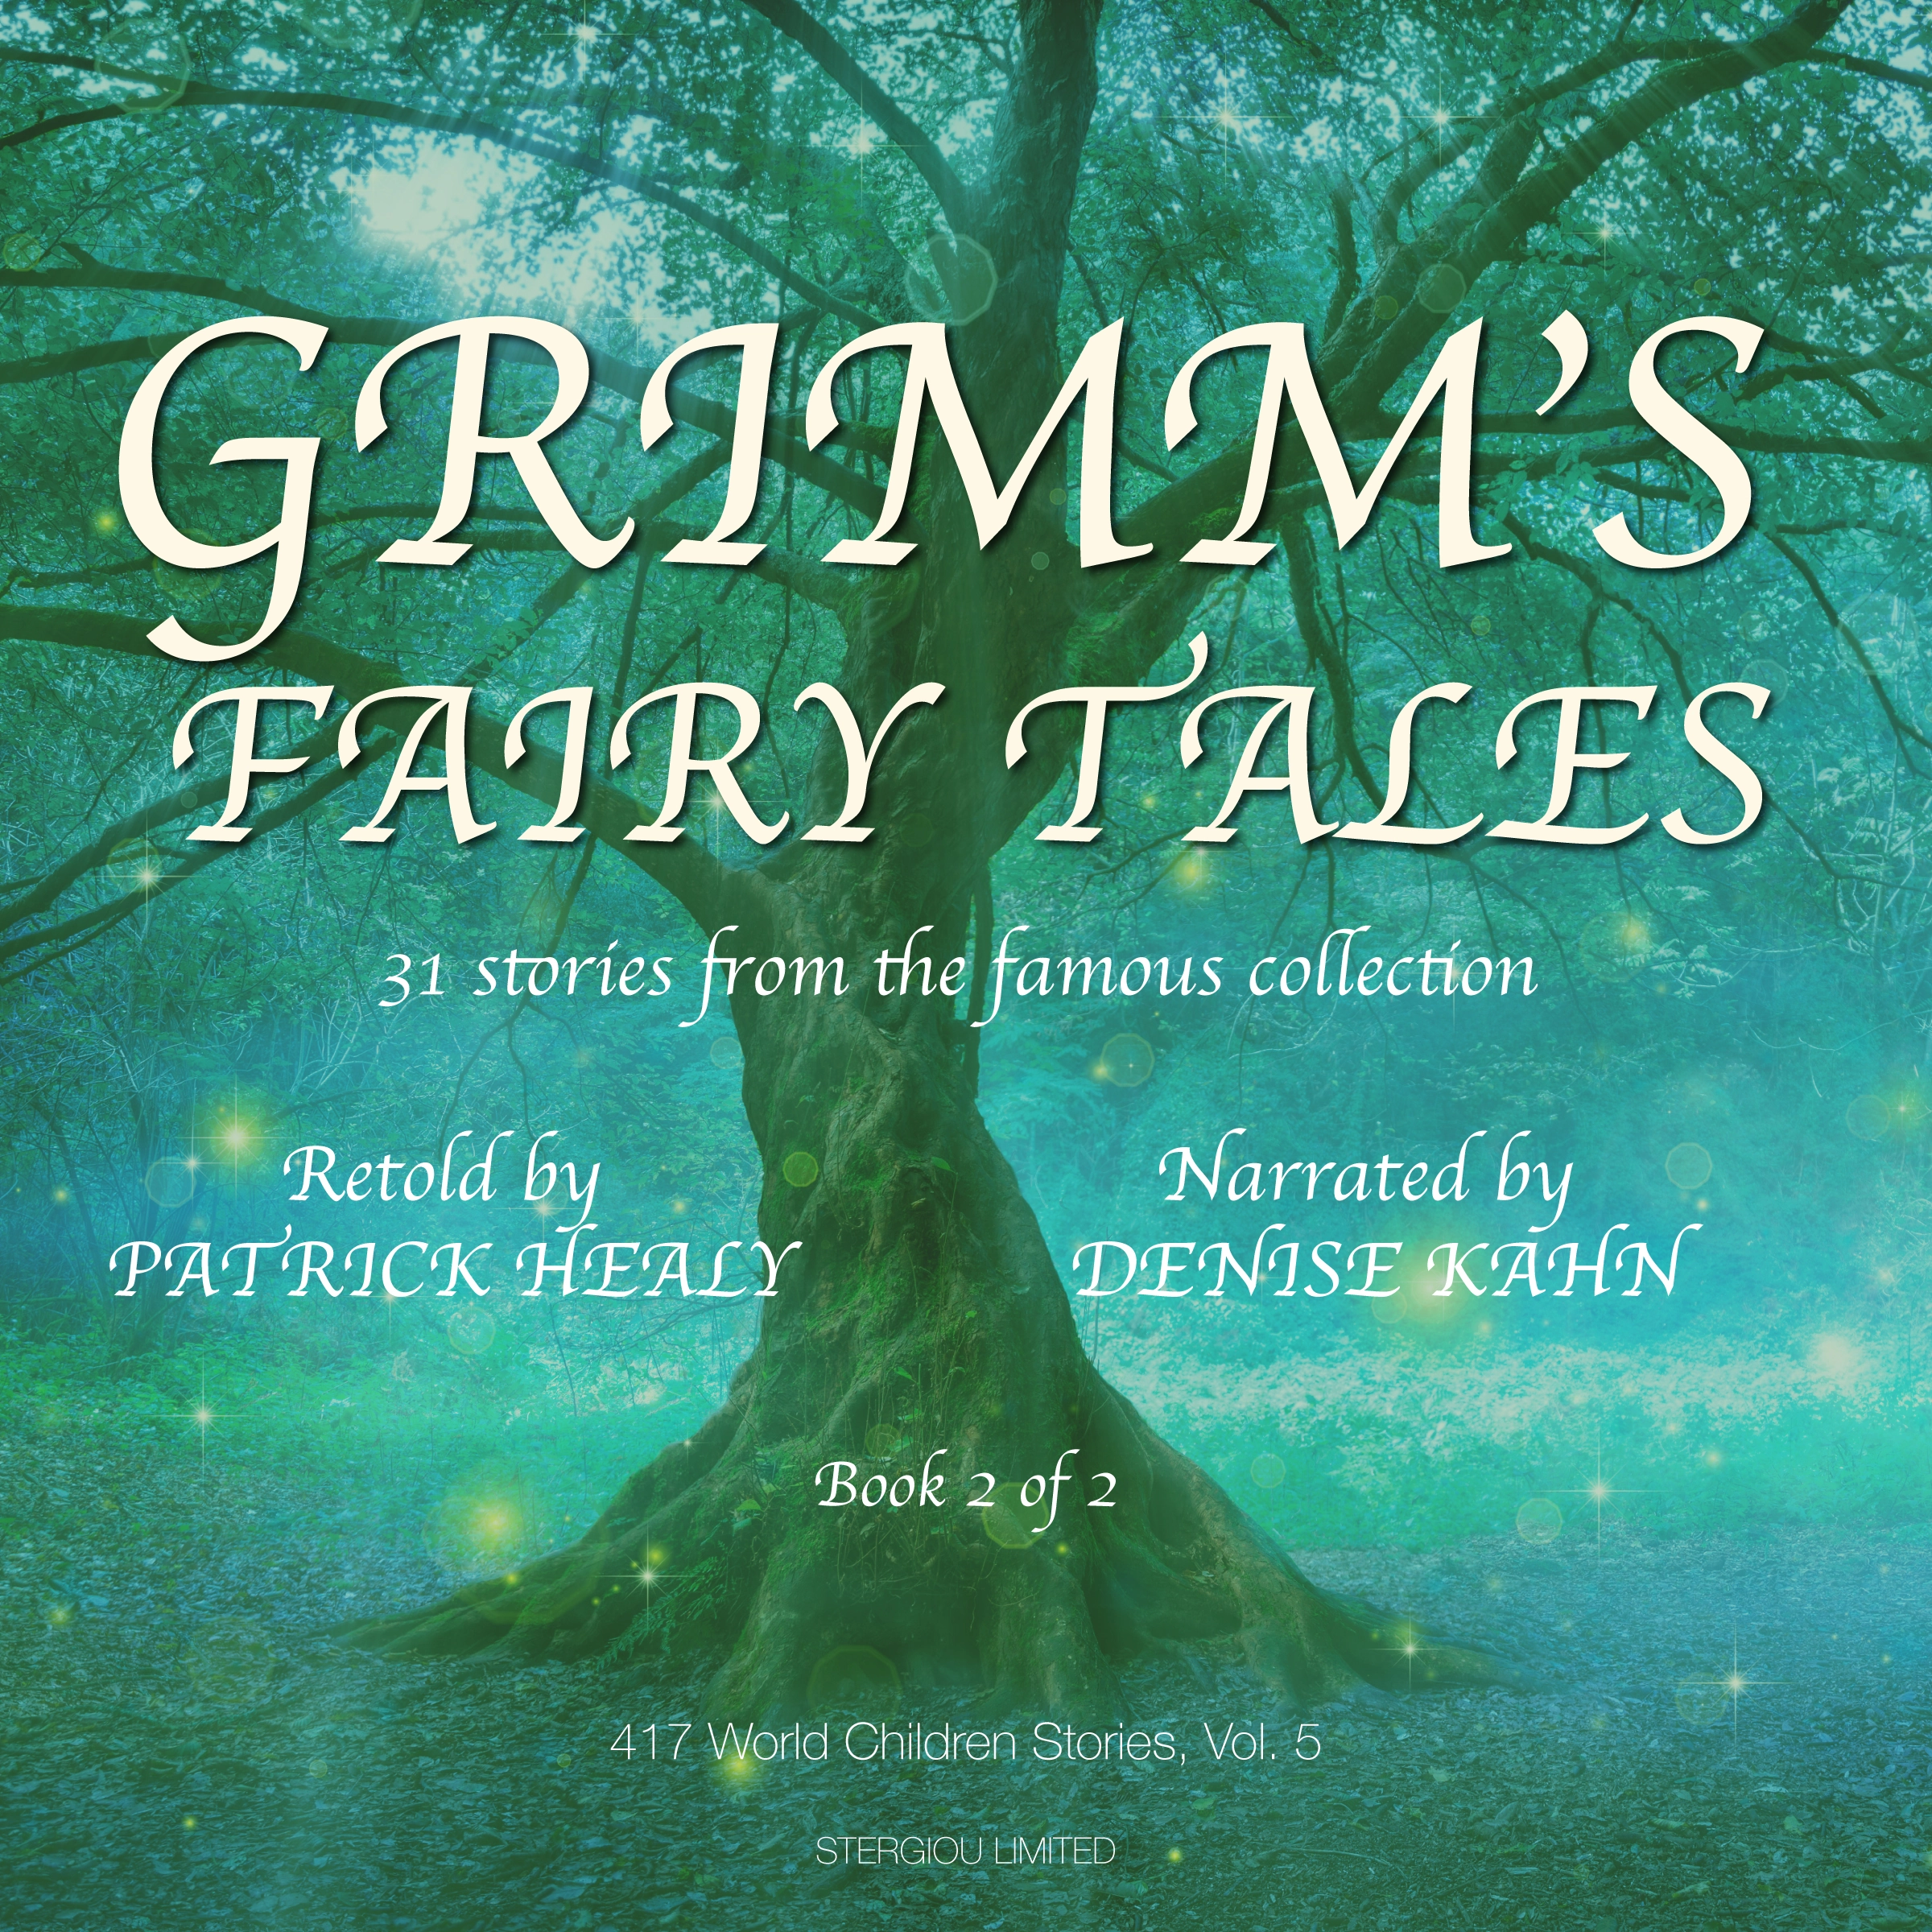 Grimm's Fairy Tales - Book 2 of 2 by Patrick Healy Audiobook